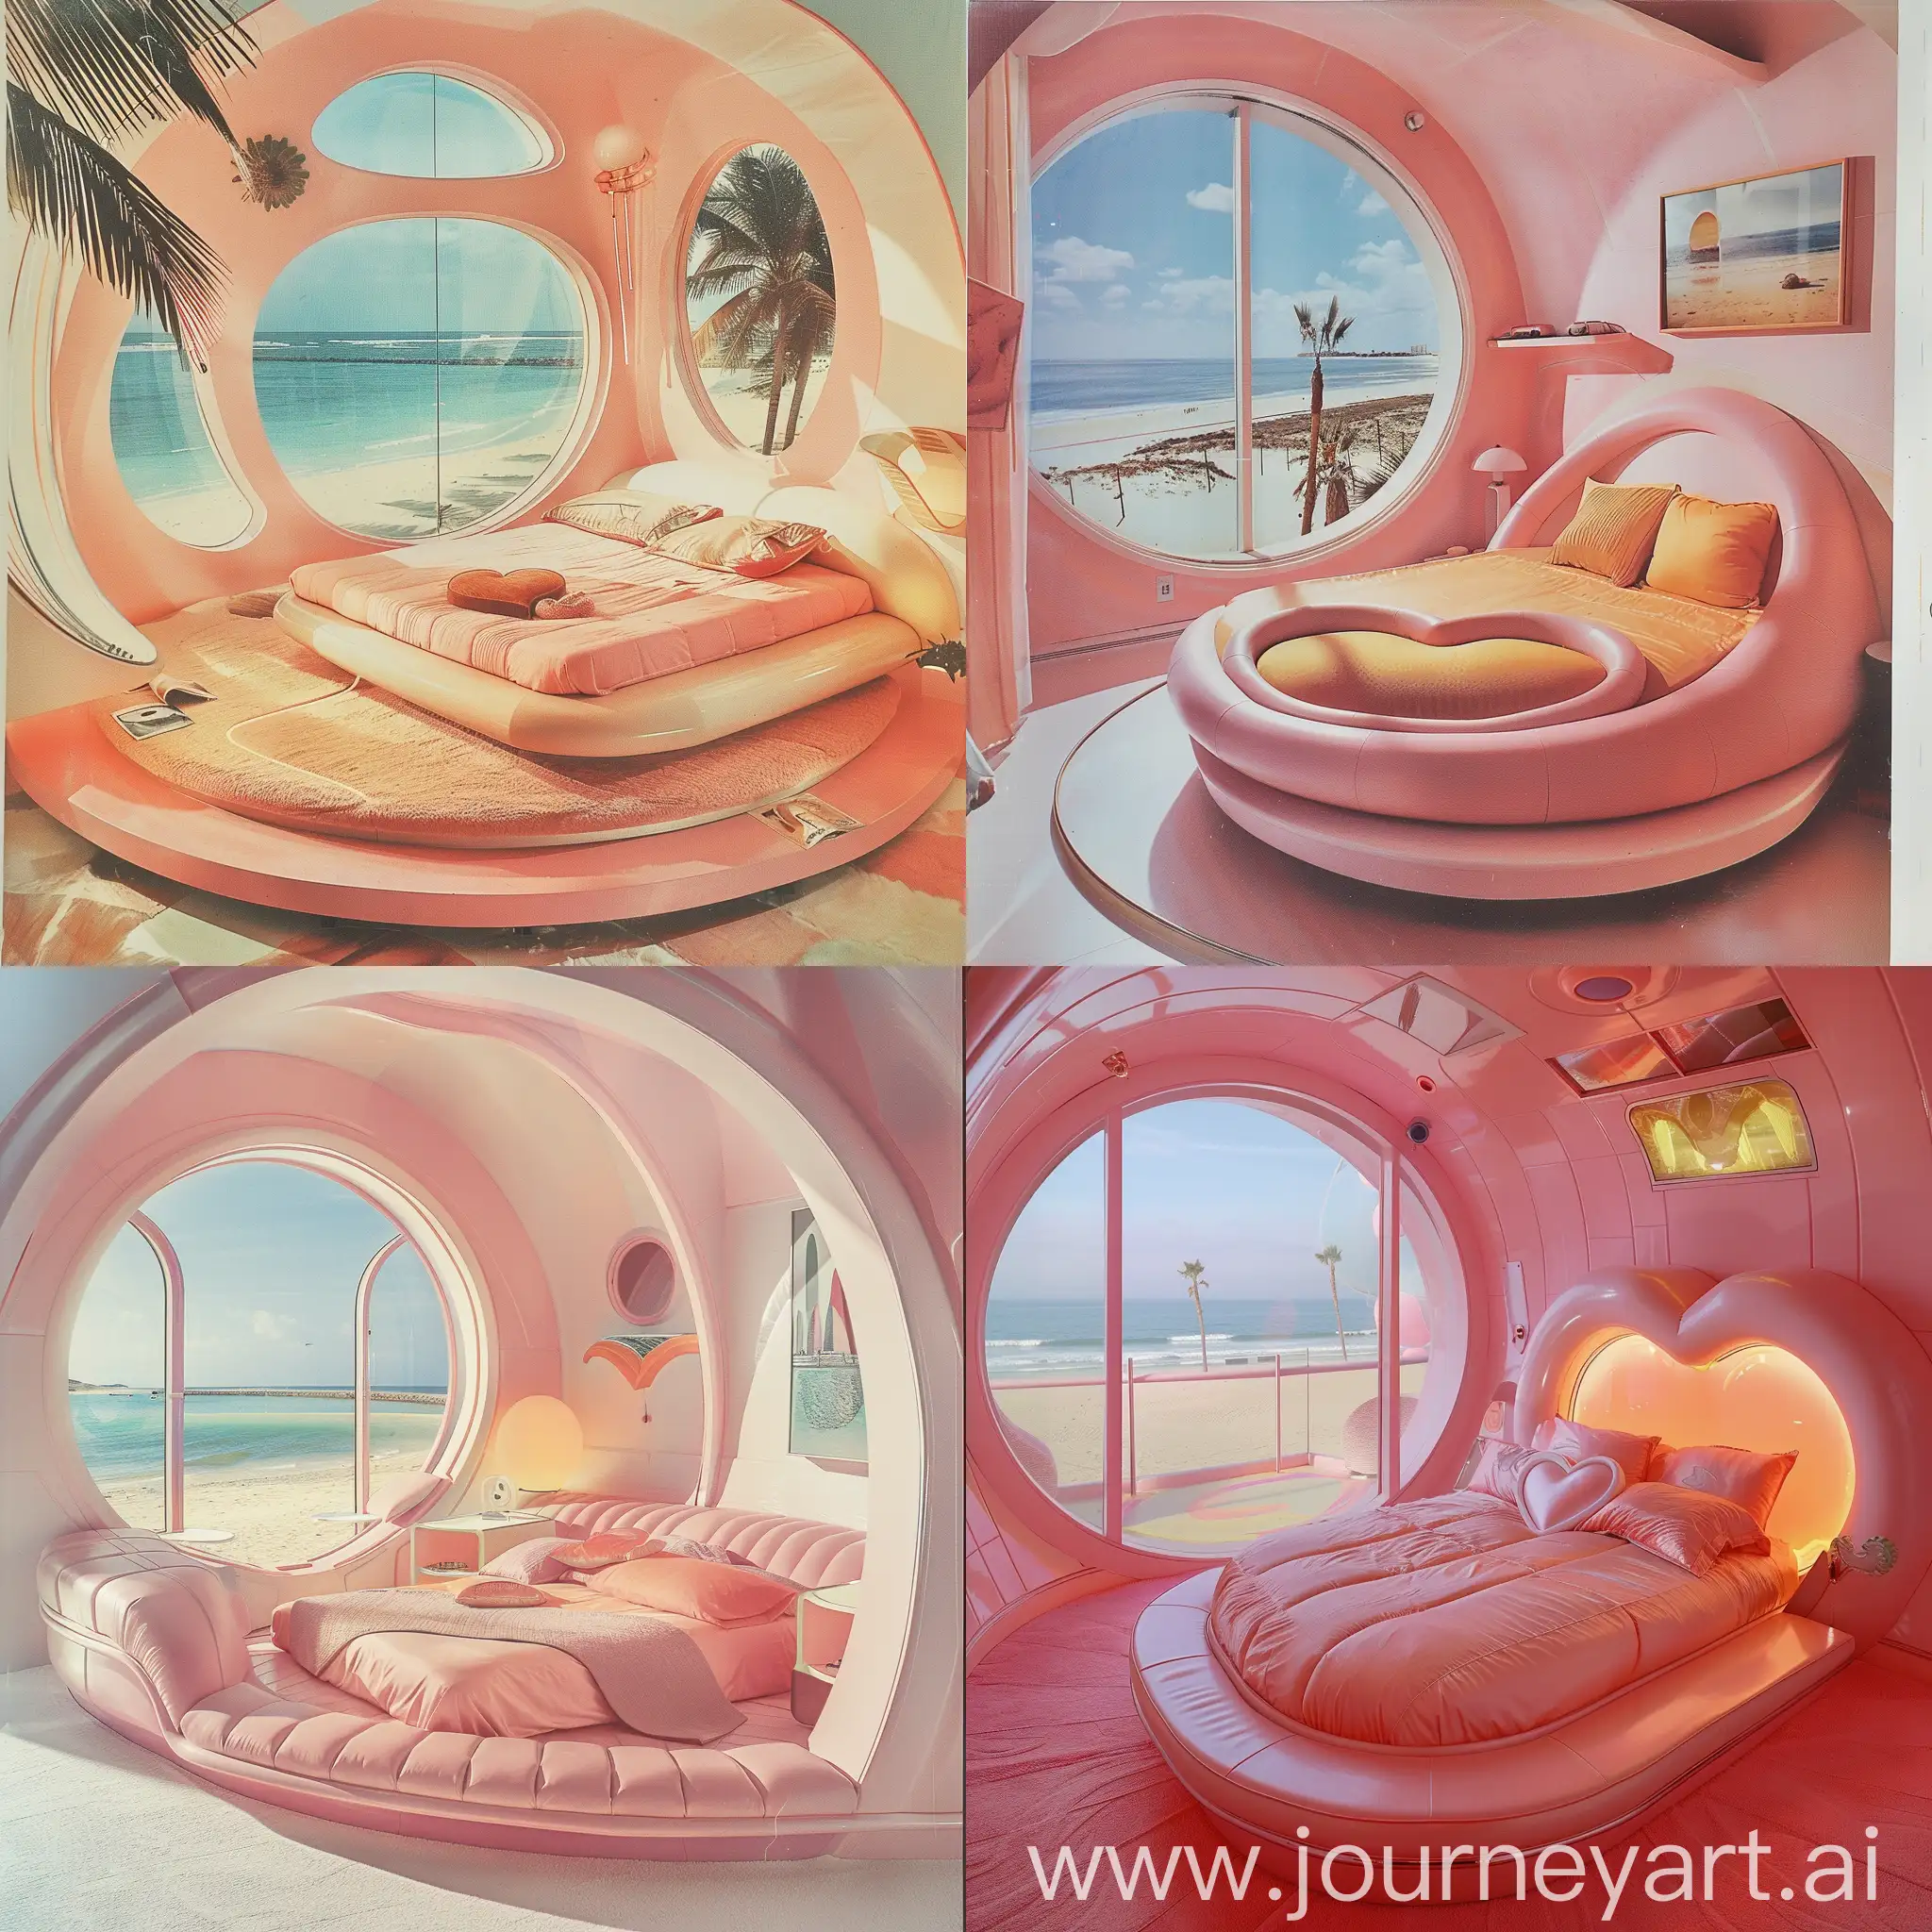 Retro-Futuristic-Pastel-Pink-Bedroom-with-HeartShaped-Bed-Overlooking-Beach